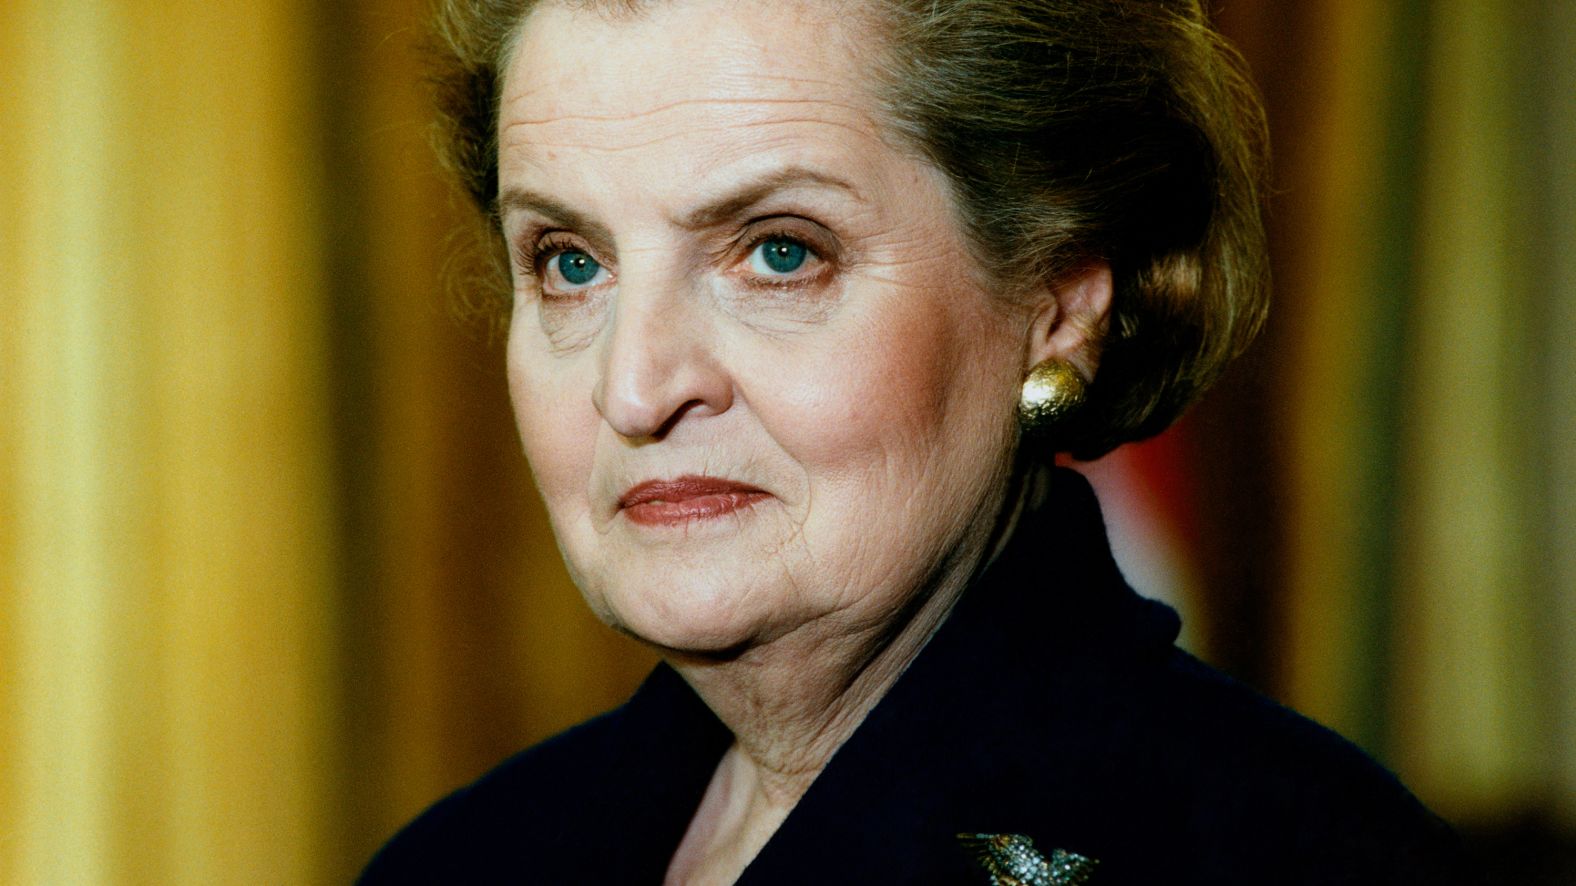 <a href="index.php?page=&url=https%3A%2F%2Fwww.cnn.com%2F2022%2F03%2F23%2Fpolitics%2Fmadeleine-albright-obituary%2Findex.html" target="_blank">Madeleine Albright,</a> the first woman to serve as US secretary of state, died of cancer at age 84, her family announced in a statement on March 23. Albright was a central figure in President Bill Clinton's administration and helped steer Western foreign policy in the aftermath of the Cold War.